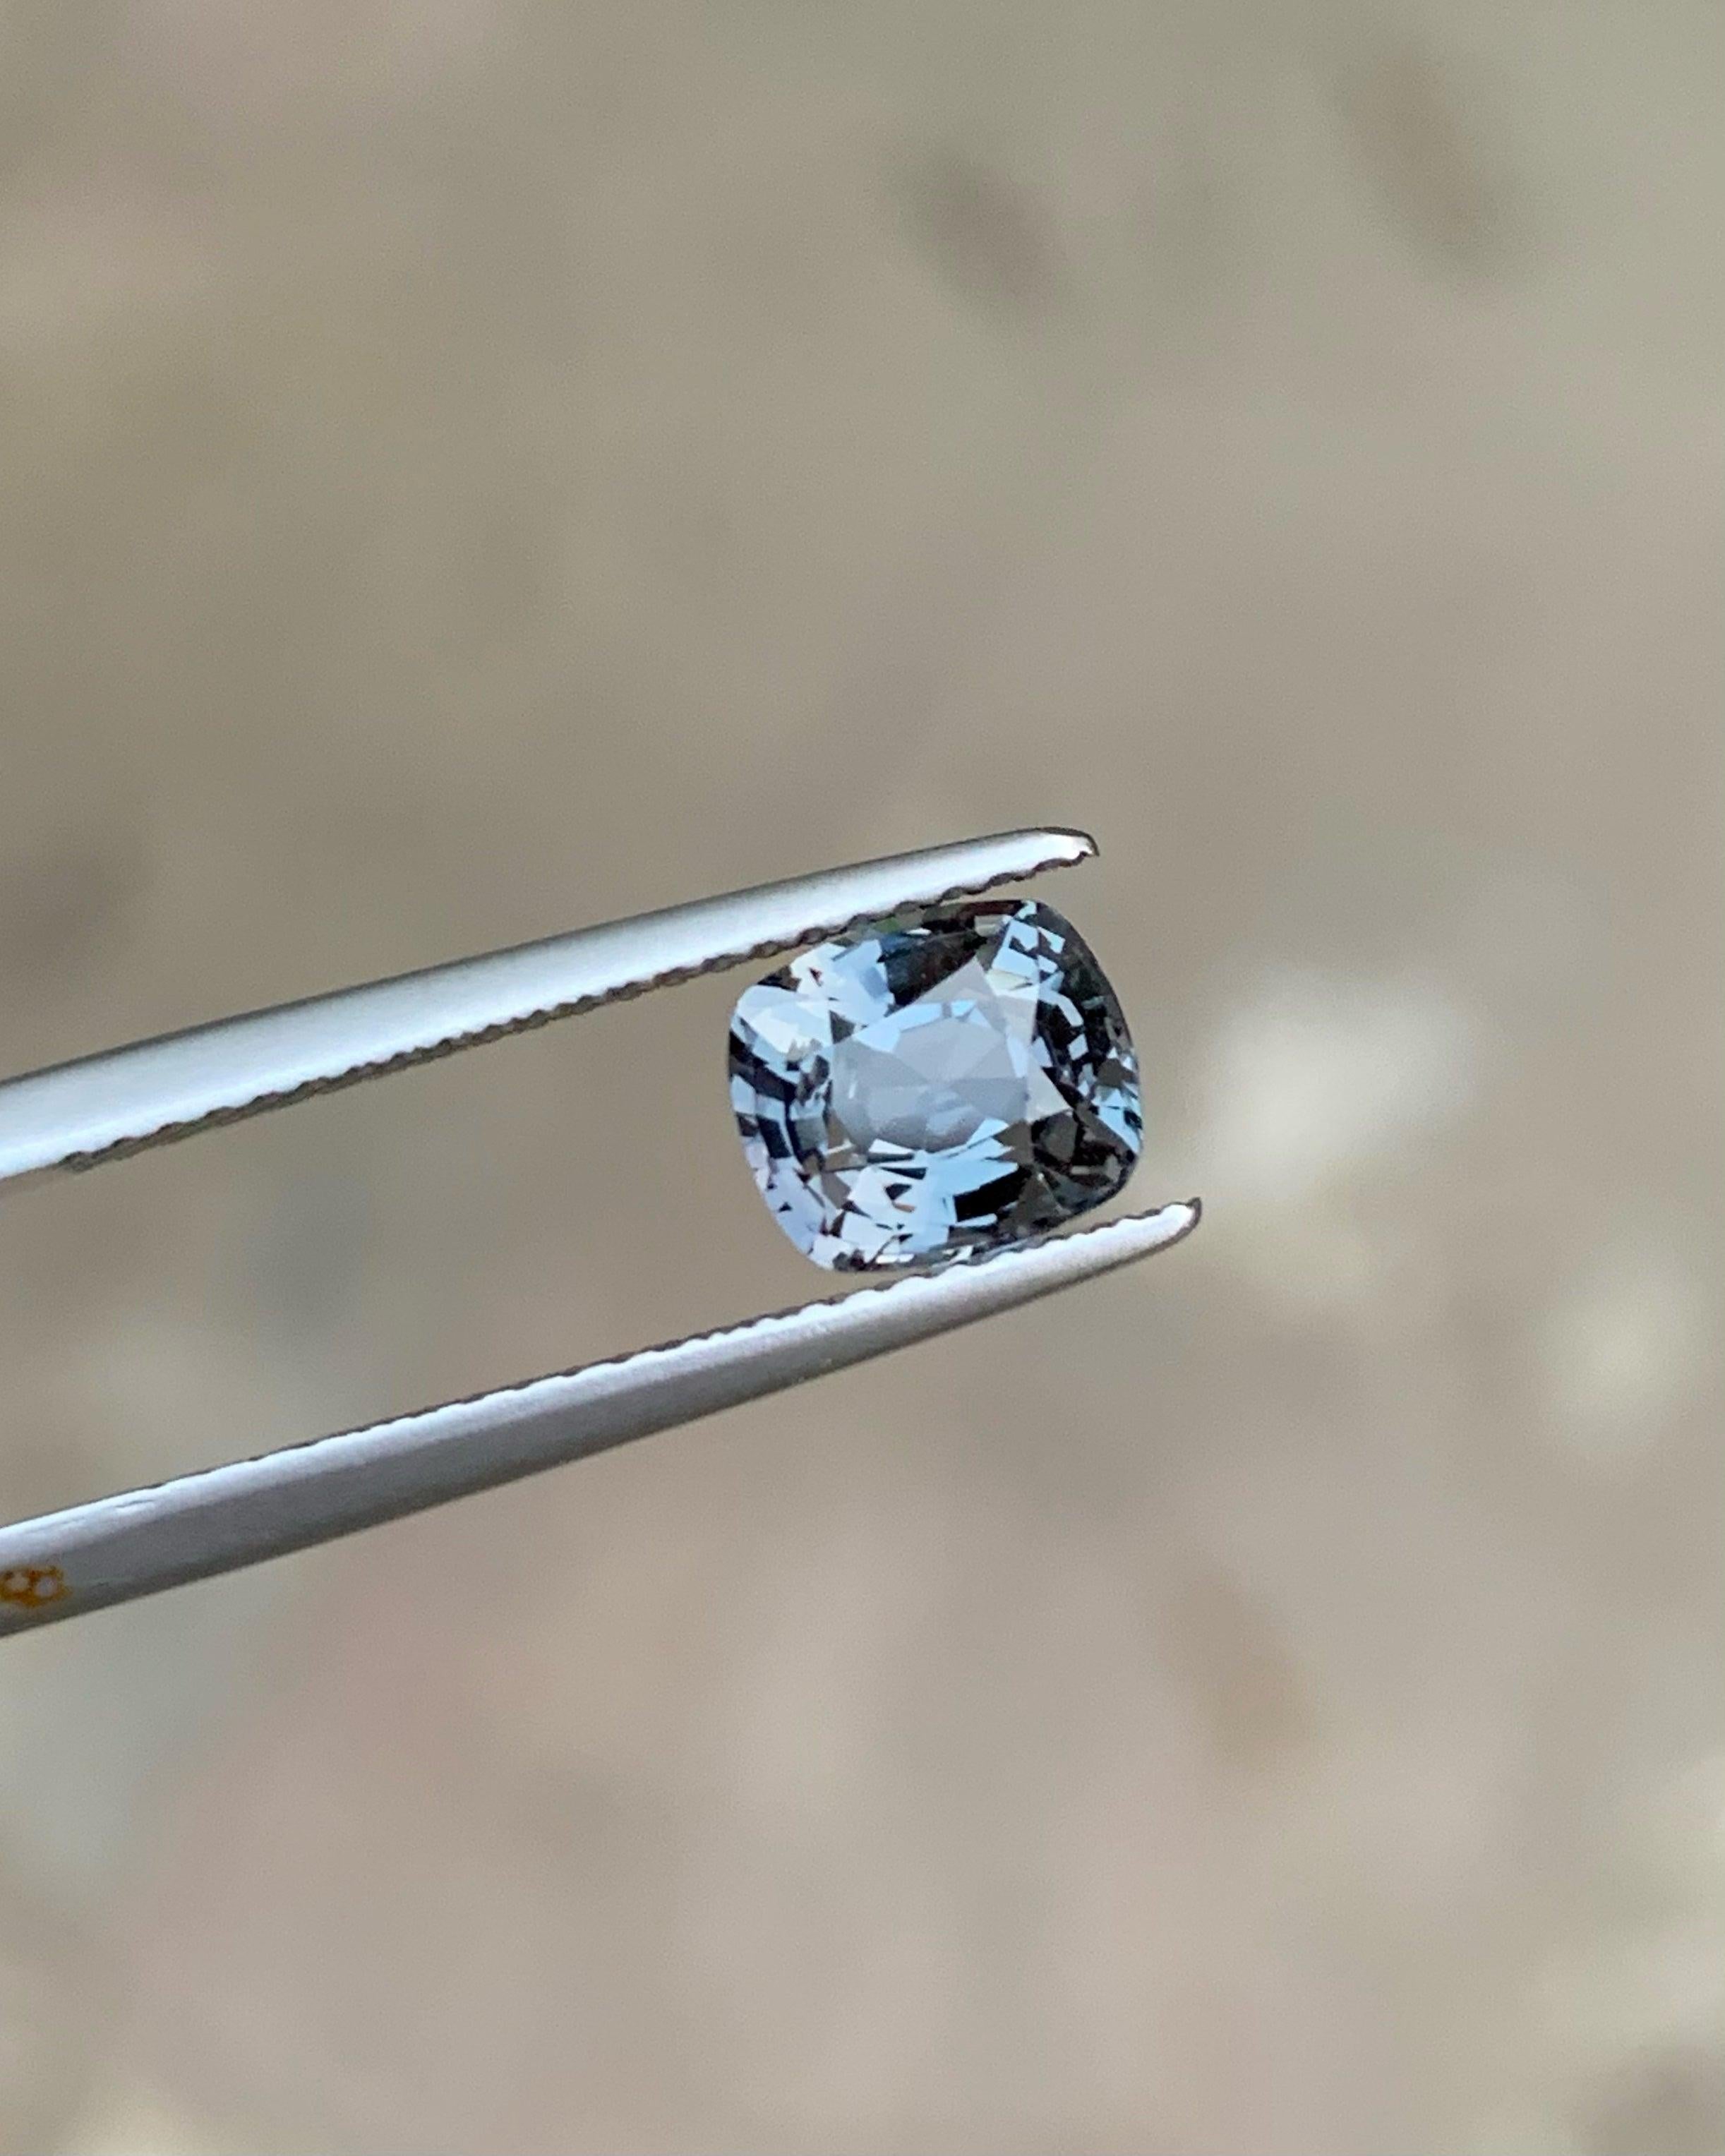 Brilliant Grey Spinel Loose Gemstone, Available For Sale At Wholesale Price Natural High Quality 1.40 carats Eye Clean Clarity Natural Loose Spinel from Burma.

Product Information:
GEMSTONE TYPE:	Brilliant Grey Spinel Loose Gemstone
WEIGHT:	1.40